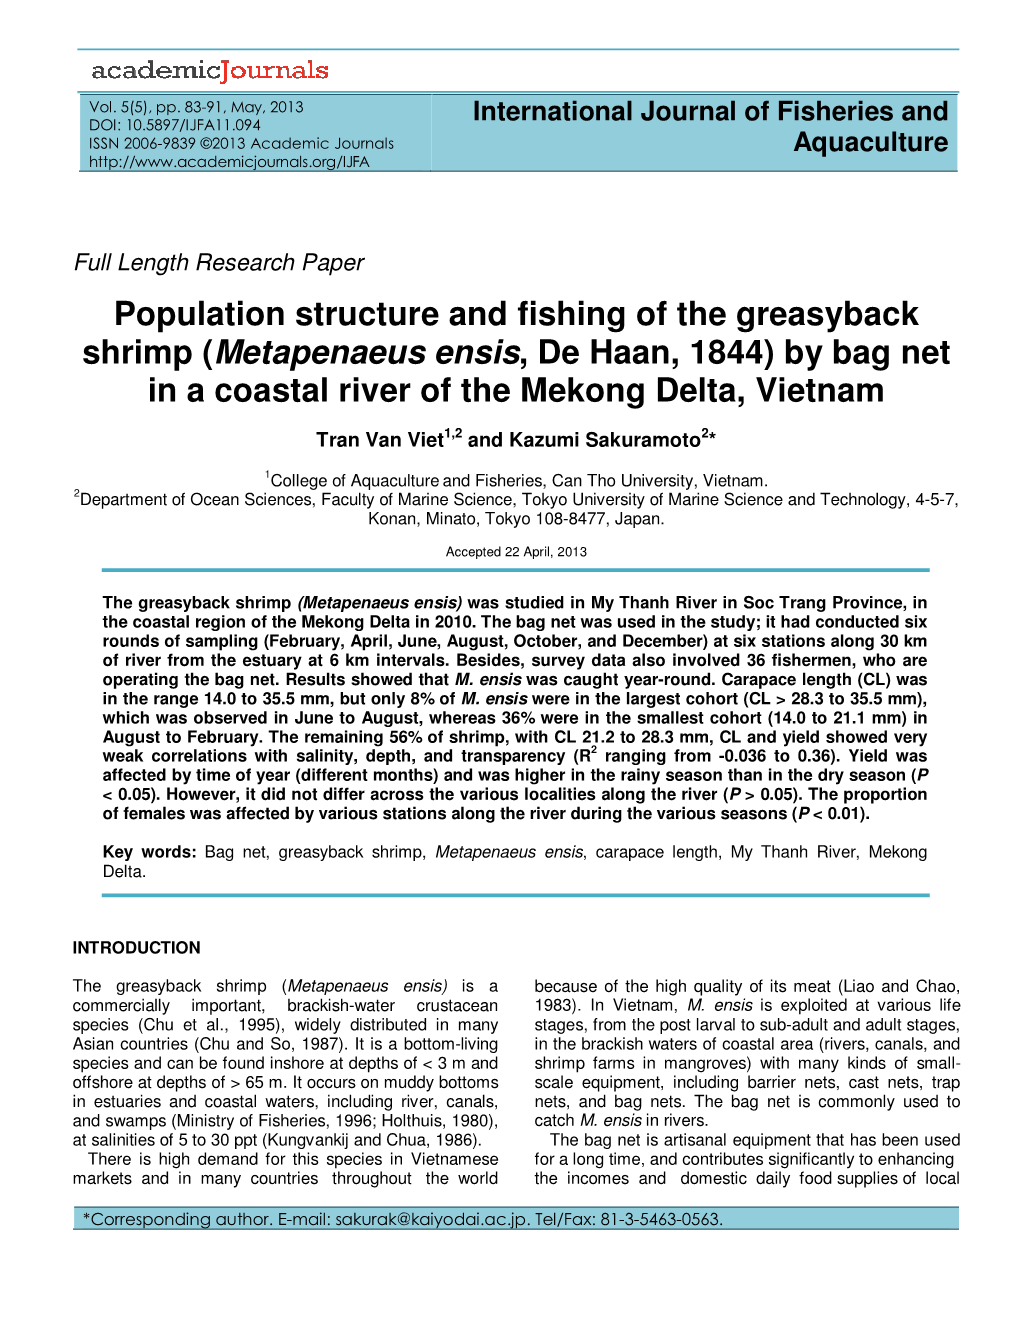 Population Structure and Fishing of the Greasyback Shrimp (Metapenaeus Ensis, De Haan, 1844) by Bag Net in a Coastal River of Th